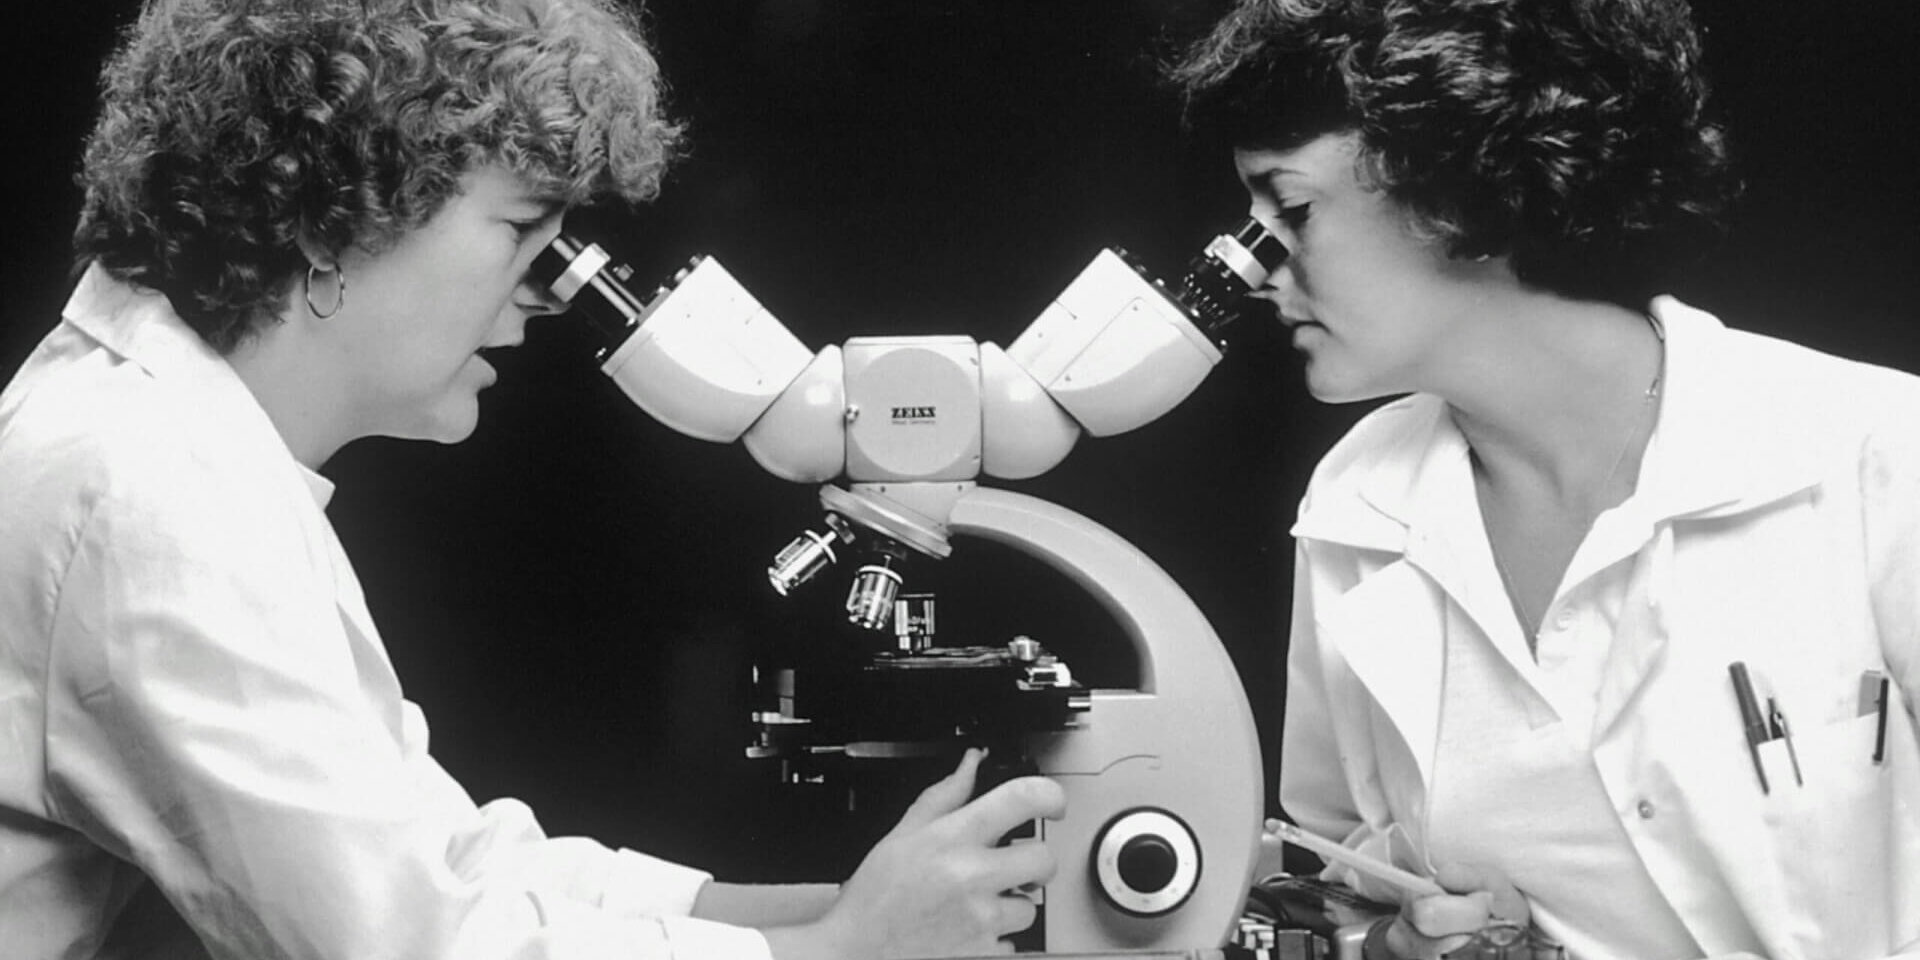 A black and white photo showing two women looking into a microscope